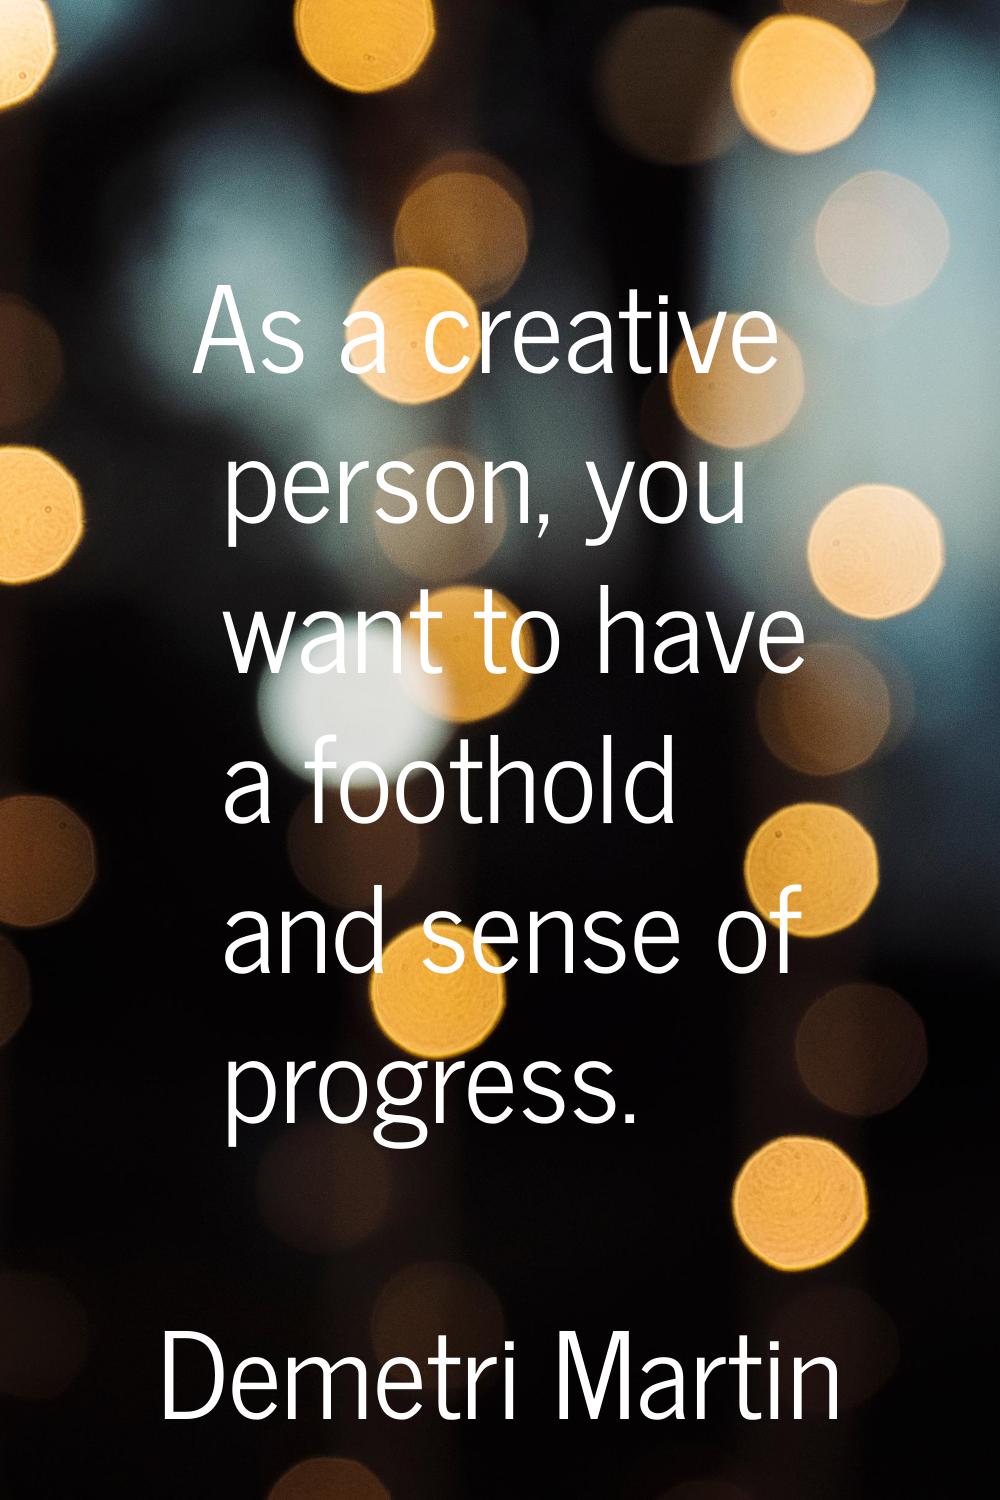 As a creative person, you want to have a foothold and sense of progress.